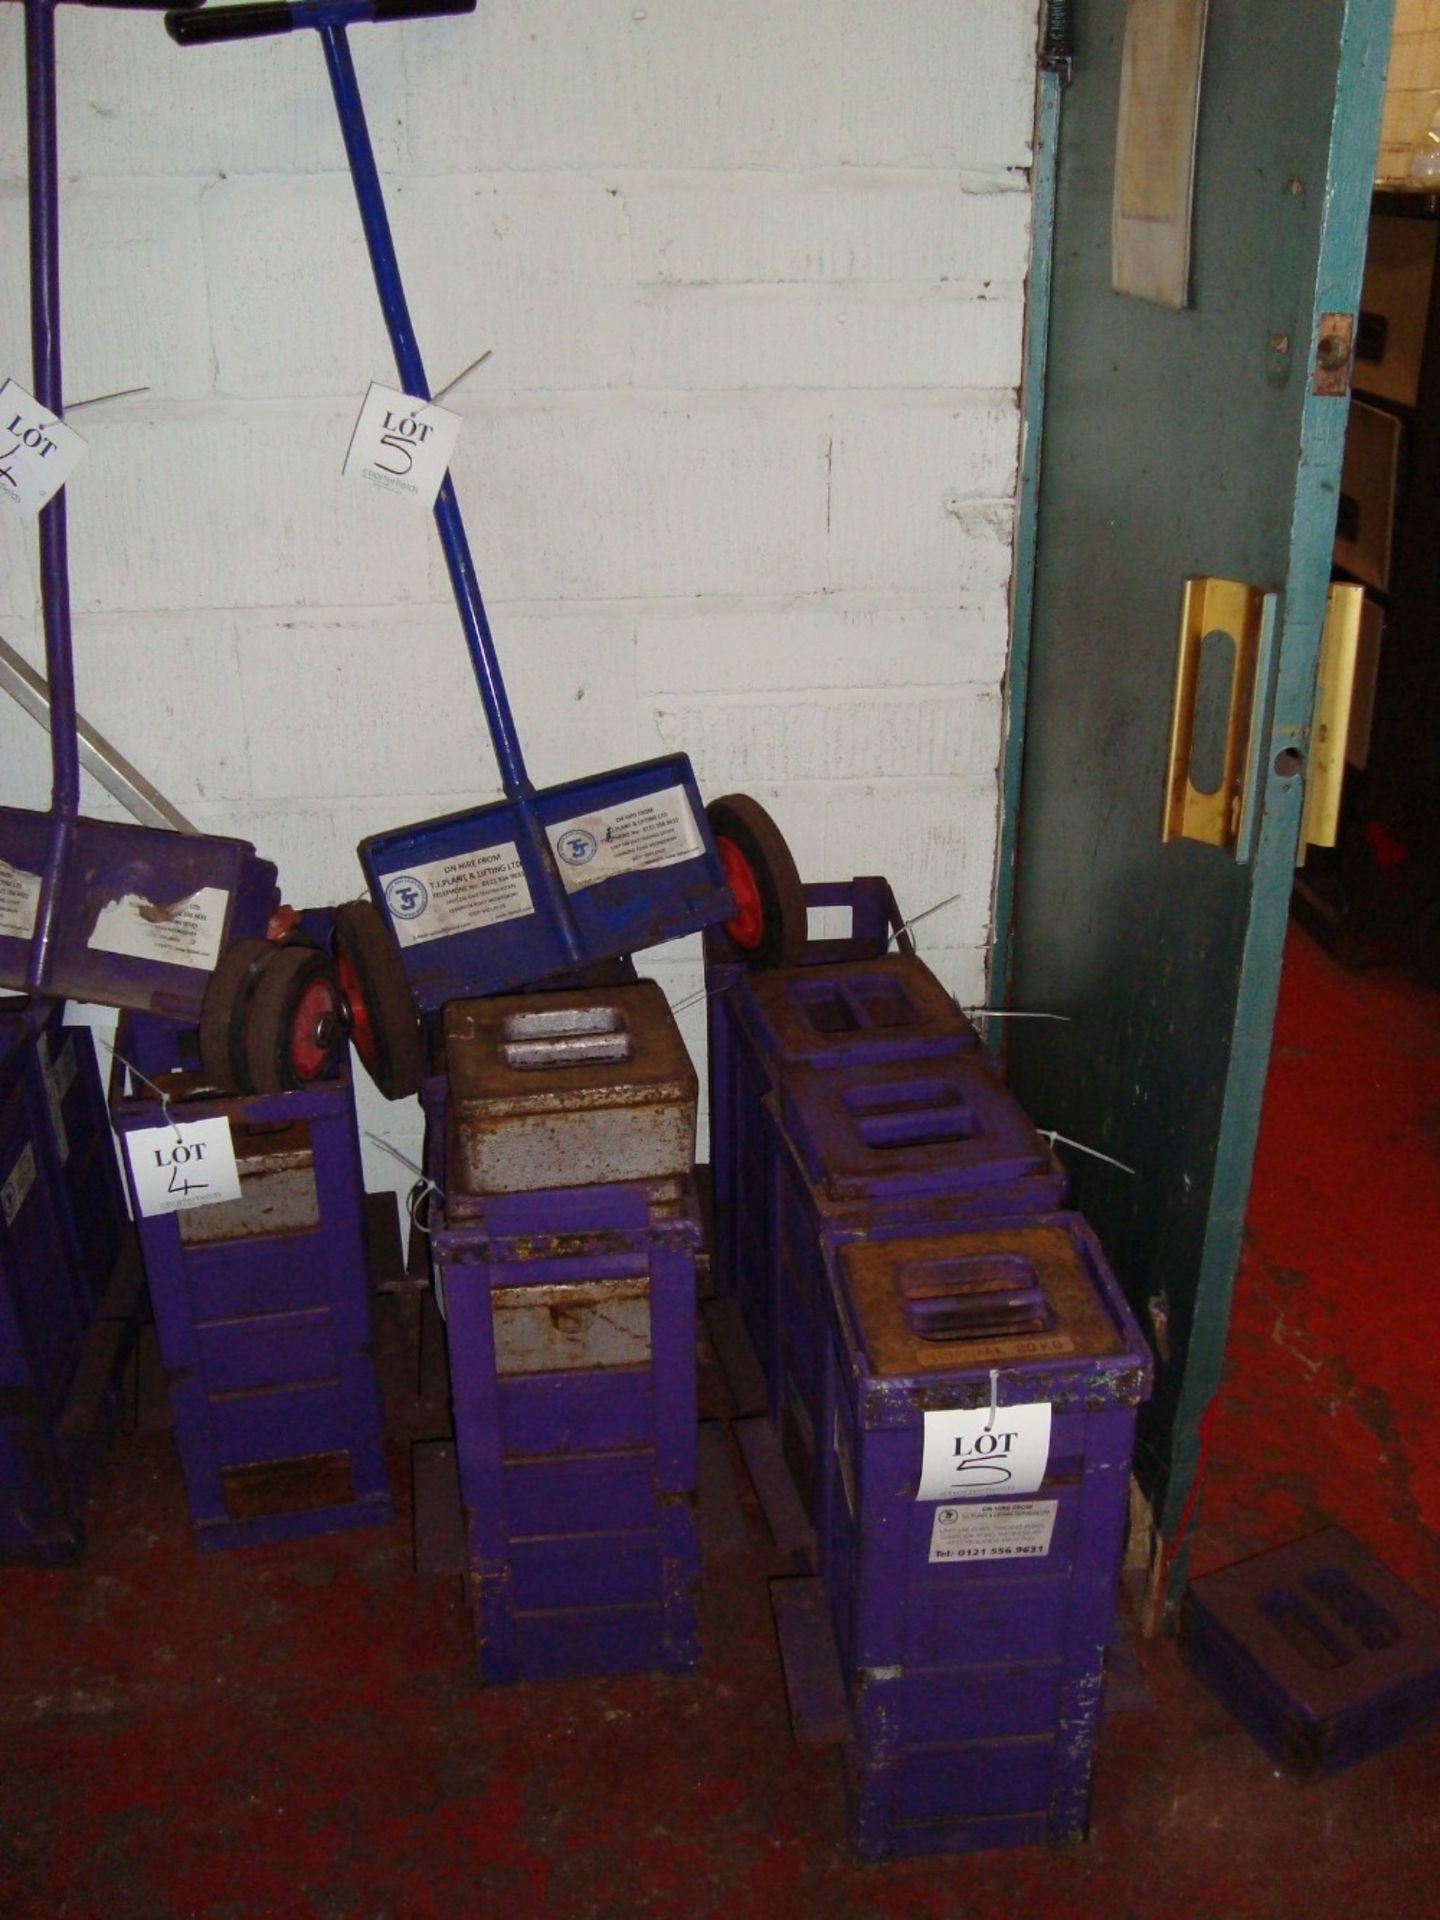 A quantity of 20kg test weights with six stillages and trolley